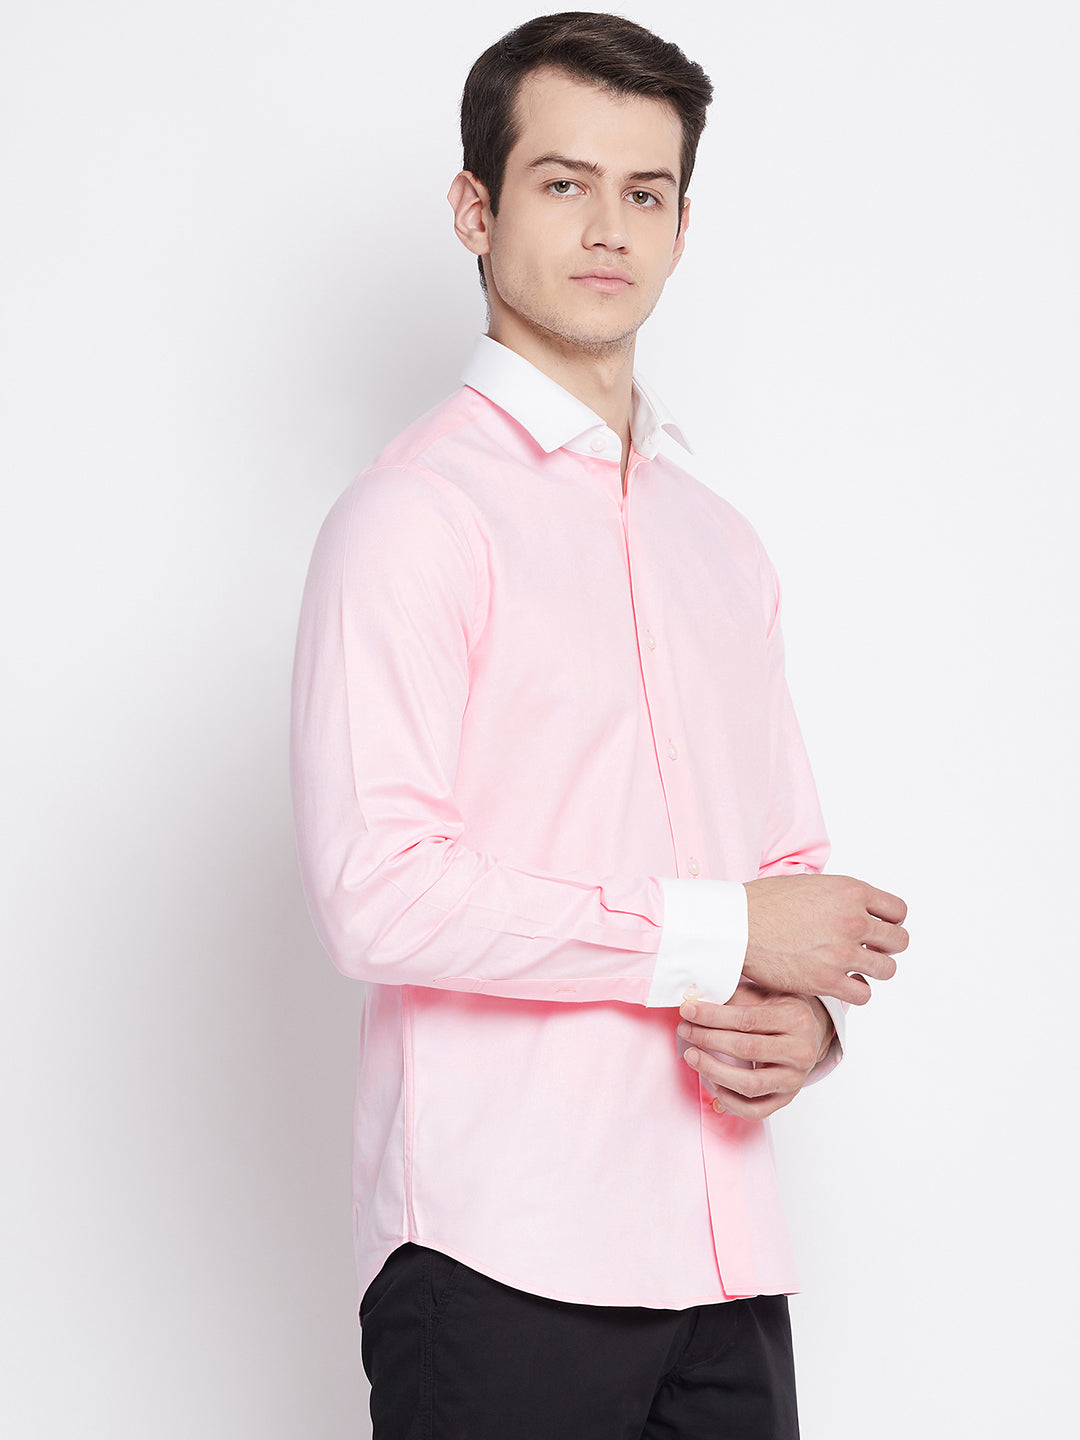 Baby Pink Cotton Twill Banker Shirt